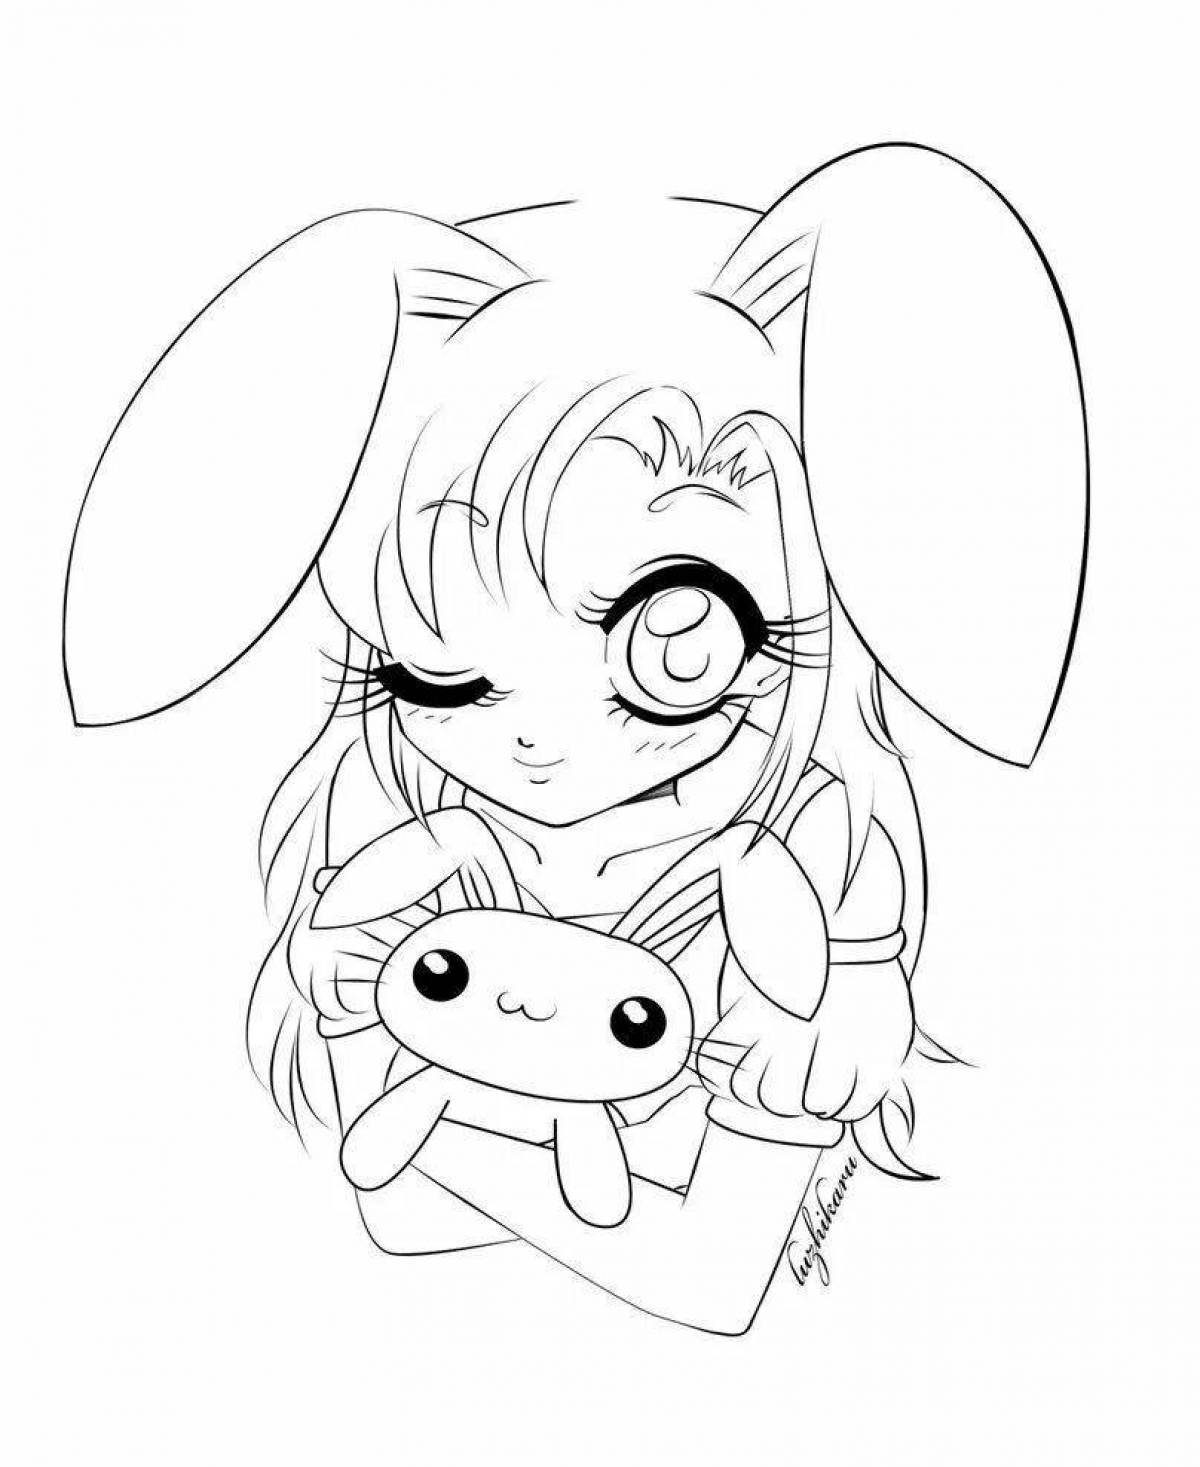 Colorful anime rabbit coloring page